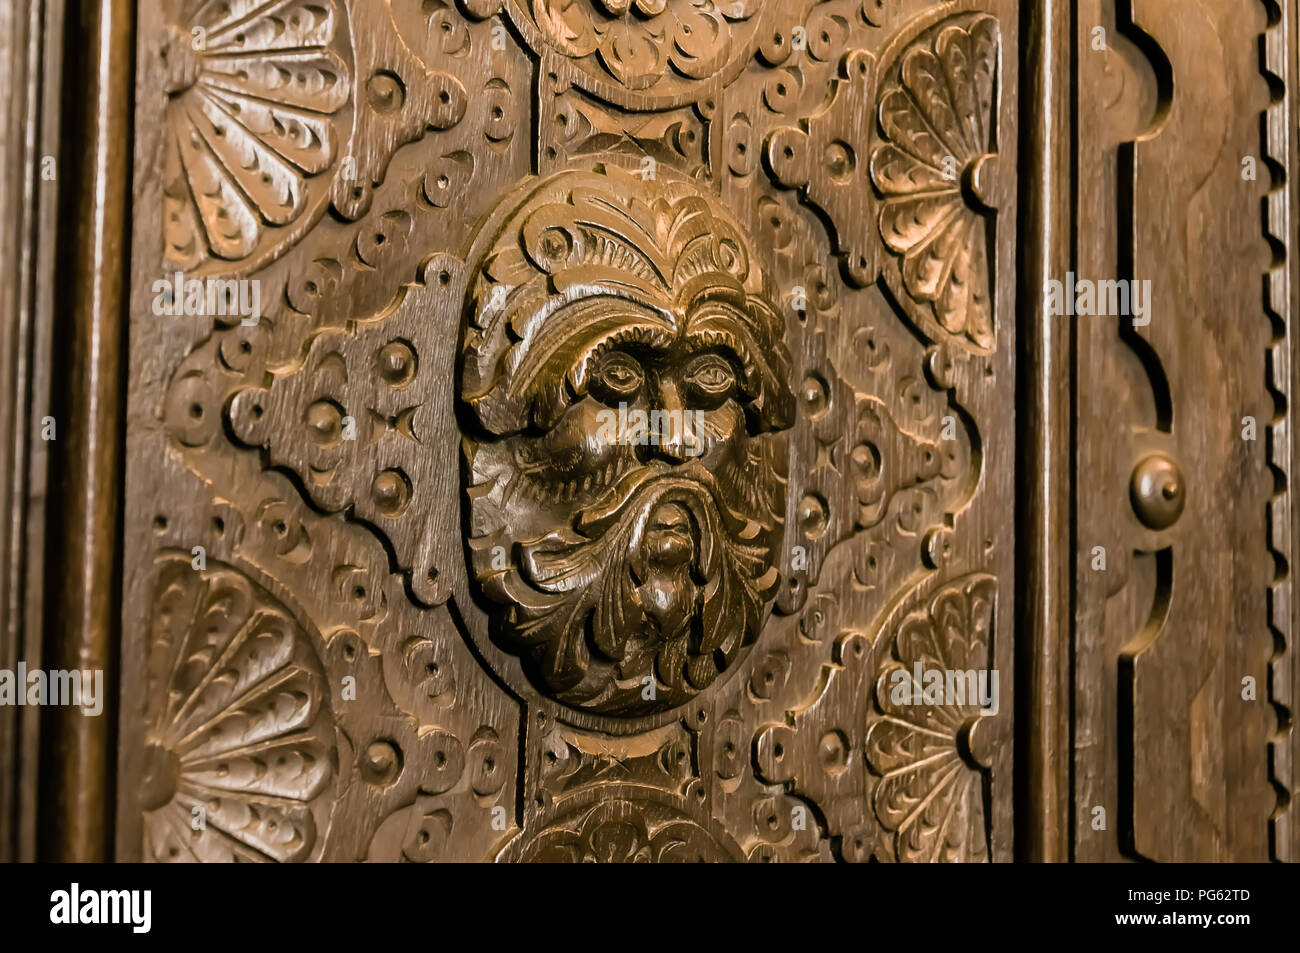 A depiction of a warrior or the green man, carved into a wooden cabinet in Bamburgh Castle, Northumberland, England, UK Stock Photo